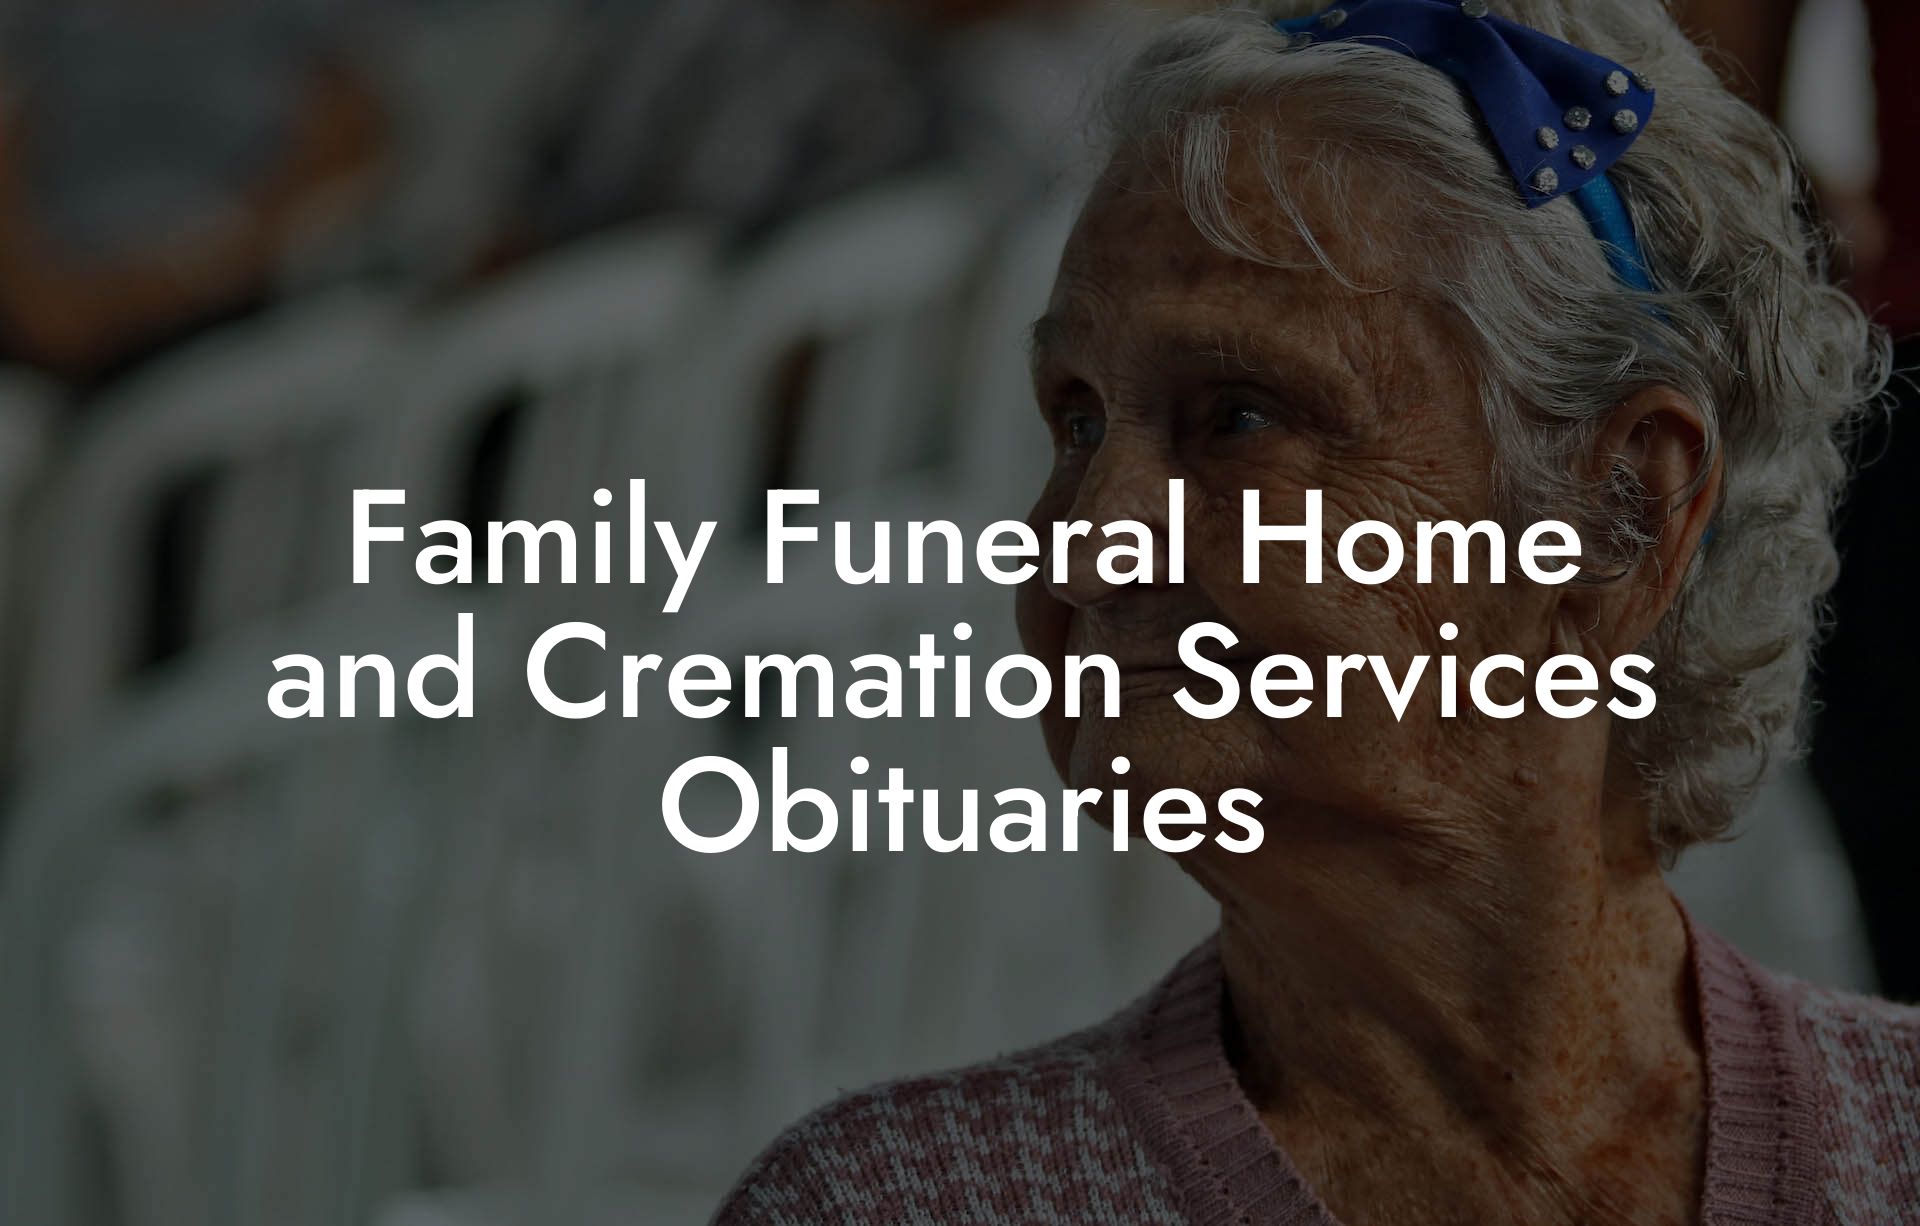 Family Funeral Home and Cremation Services Obituaries